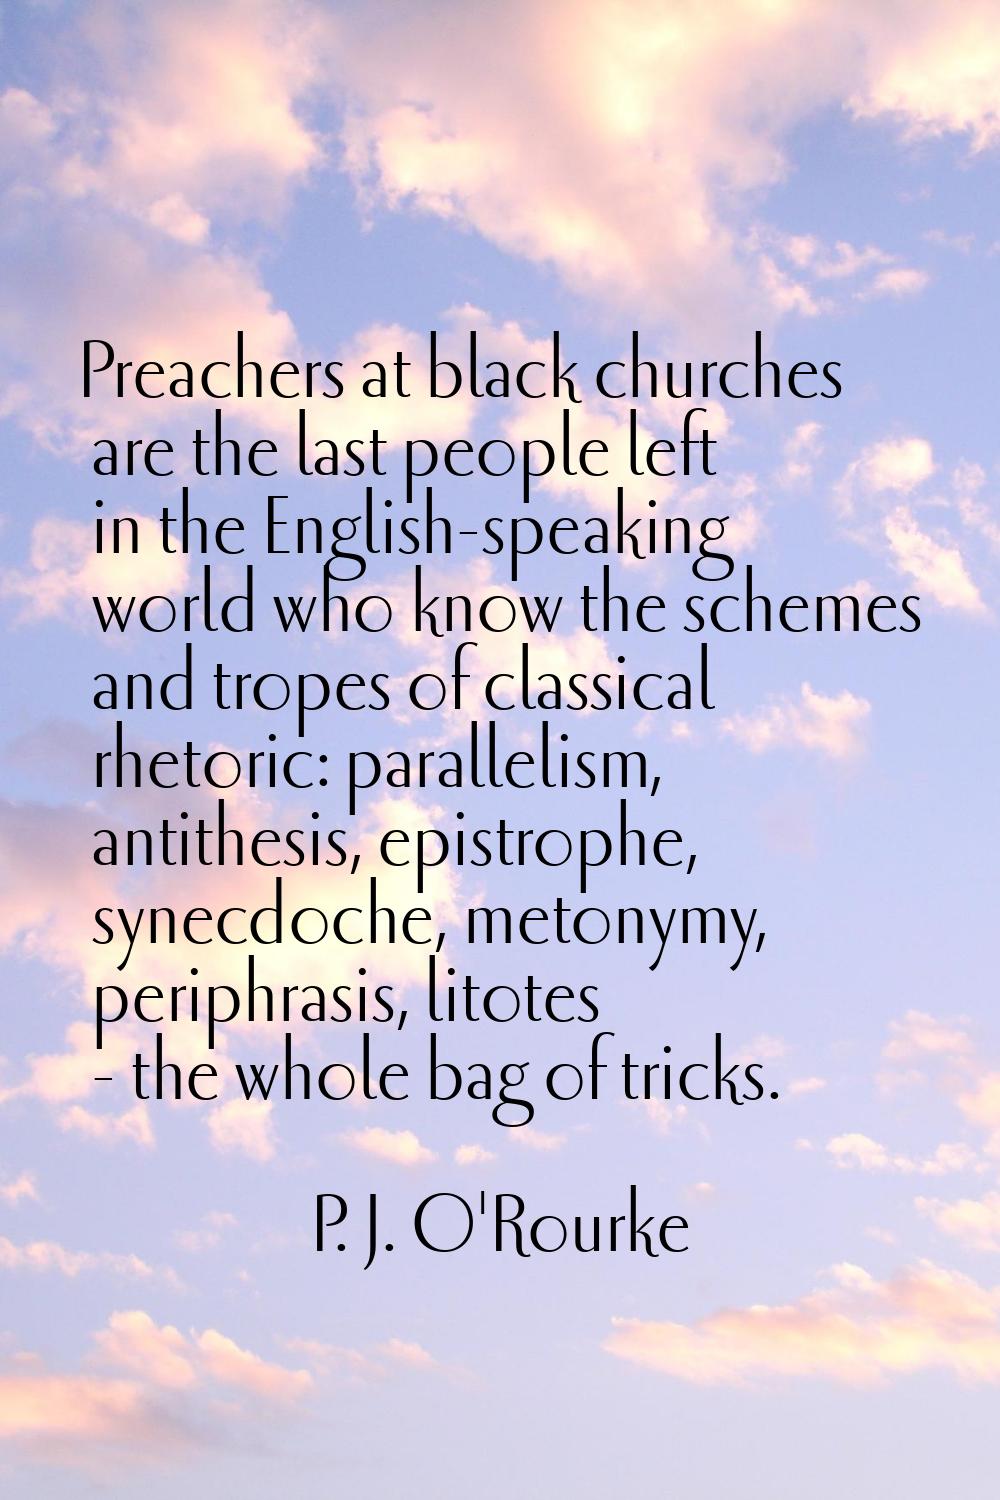 Preachers at black churches are the last people left in the English-speaking world who know the sch